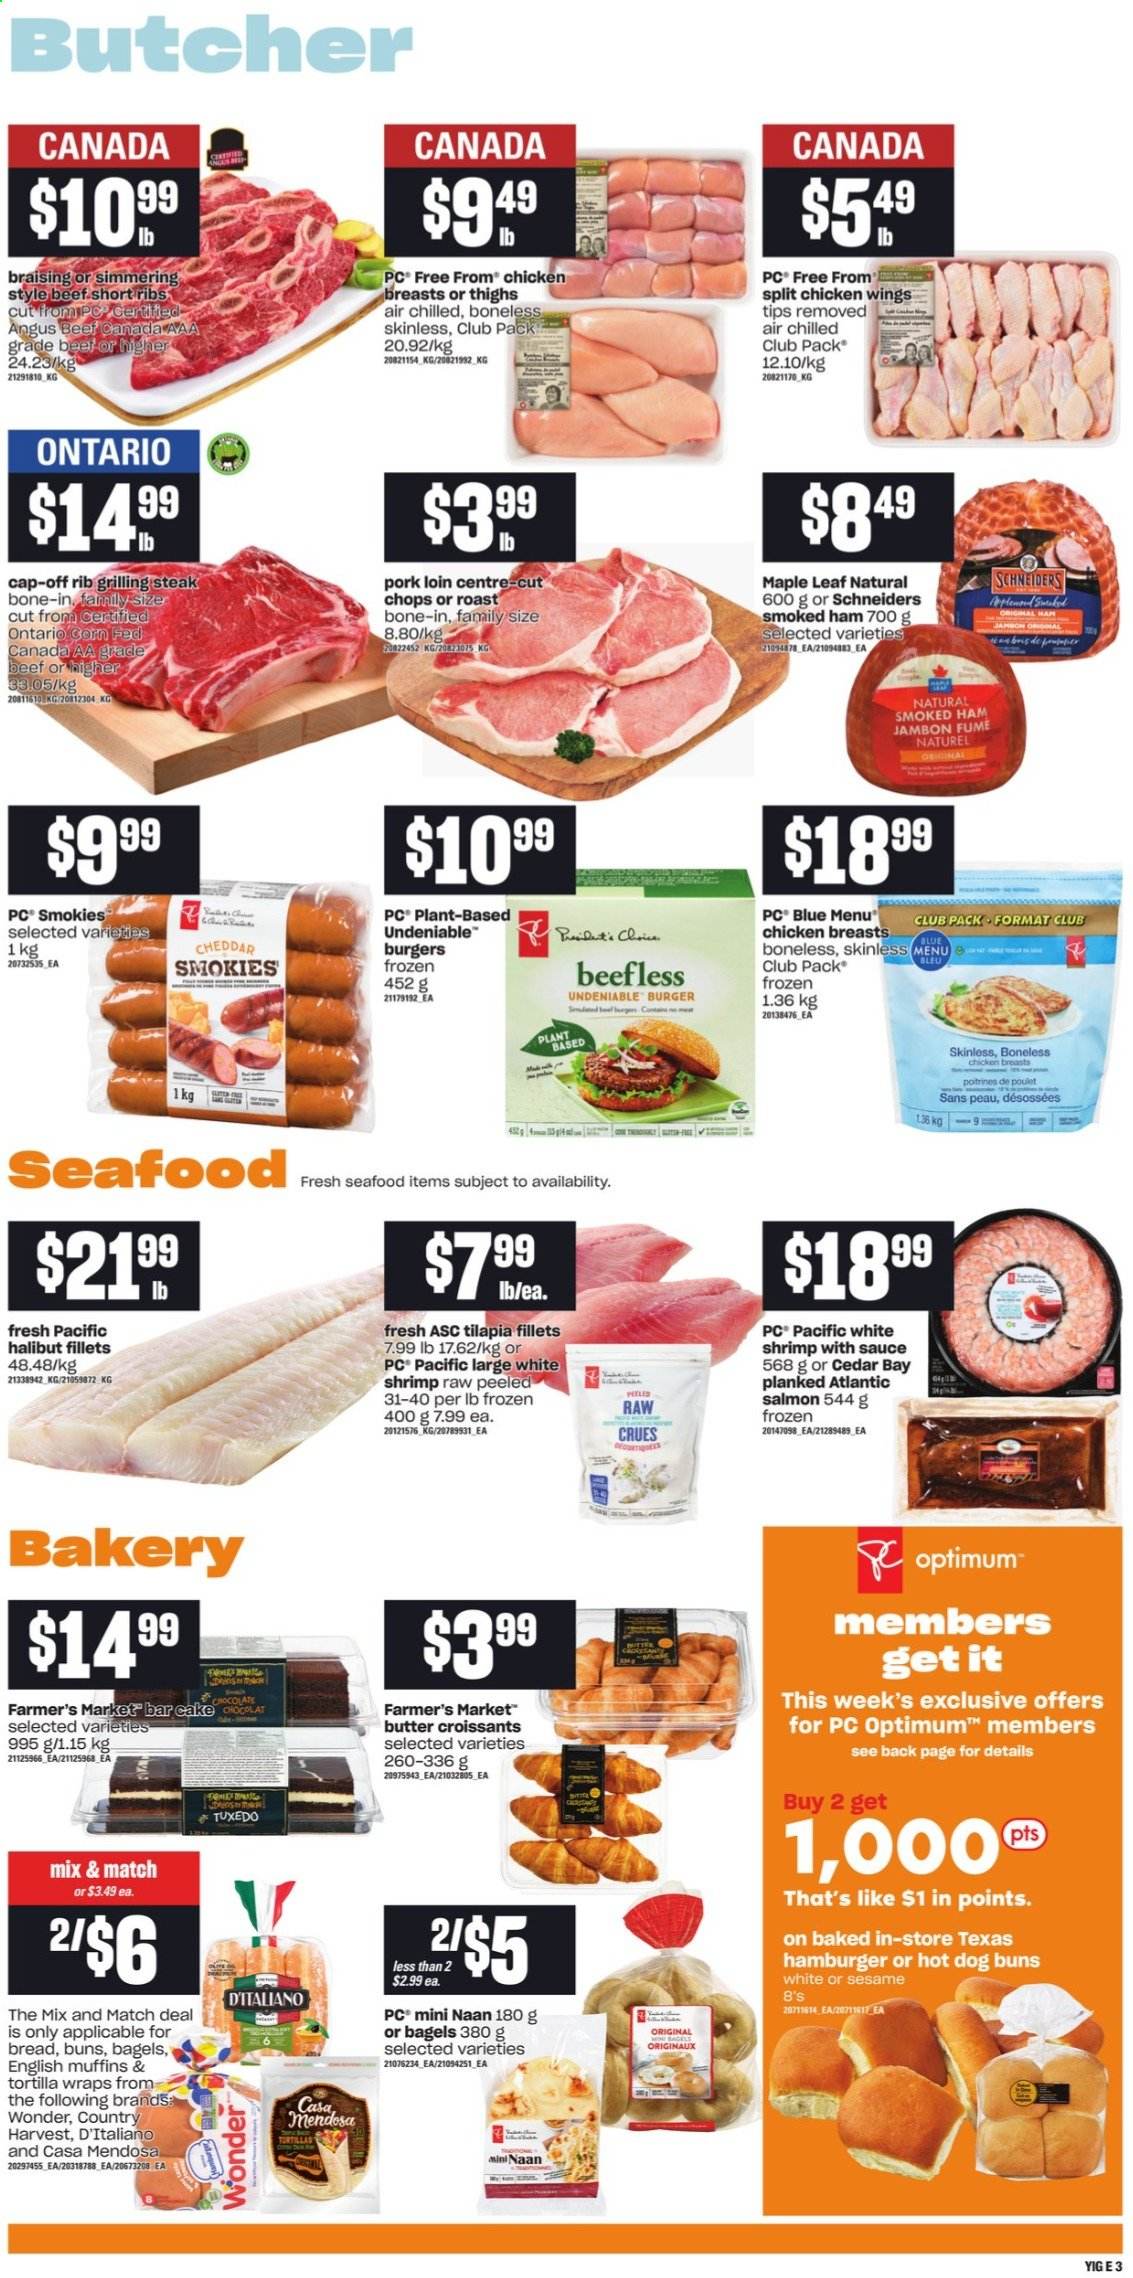 thumbnail - Independent Flyer - August 19, 2021 - August 25, 2021 - Sales products - bagels, english muffins, tortillas, cake, croissant, buns, wraps, salmon, tilapia, halibut, seafood, shrimps, ham, smoked ham, cheddar, cheese, Country Harvest, chicken wings, chocolate, chicken breasts, beef meat, pork loin, pork meat, Optimum, steak. Page 5.